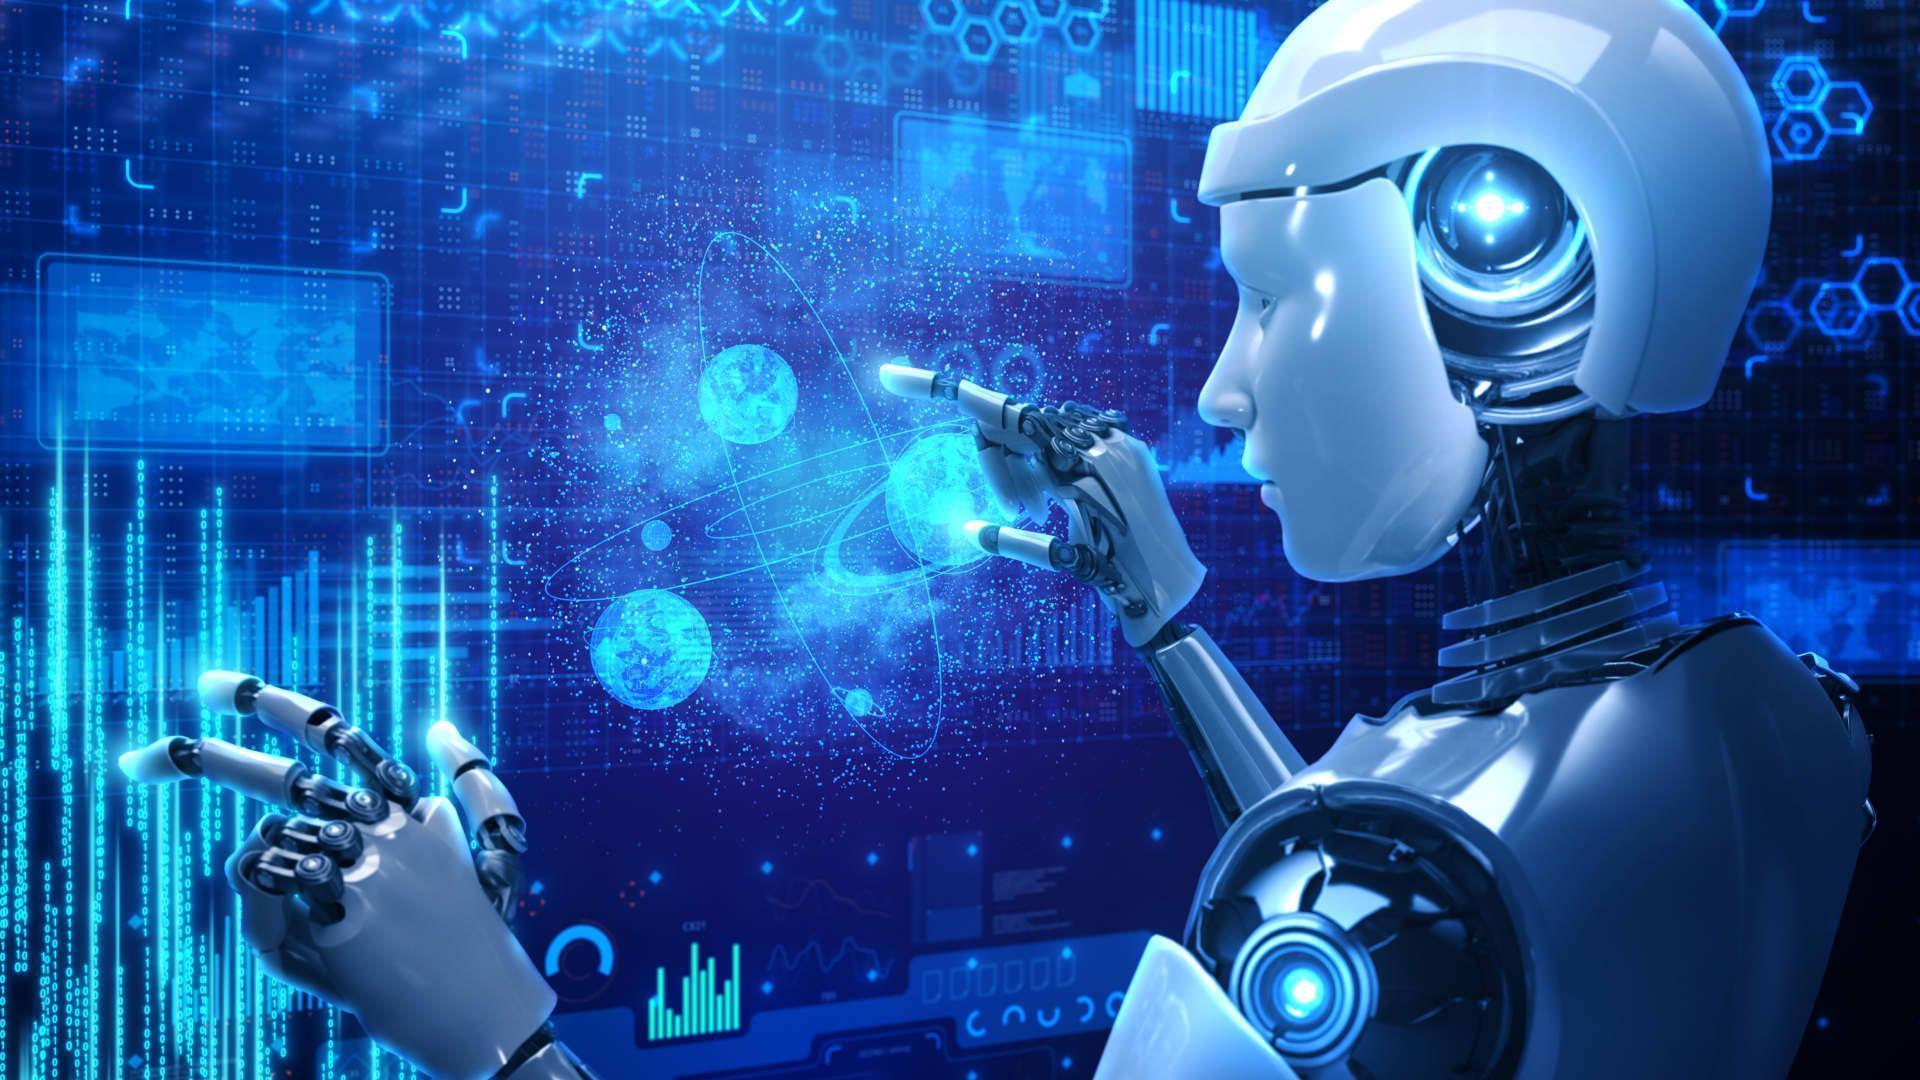 The global AI market size expected to reach US$298 billion by 2024